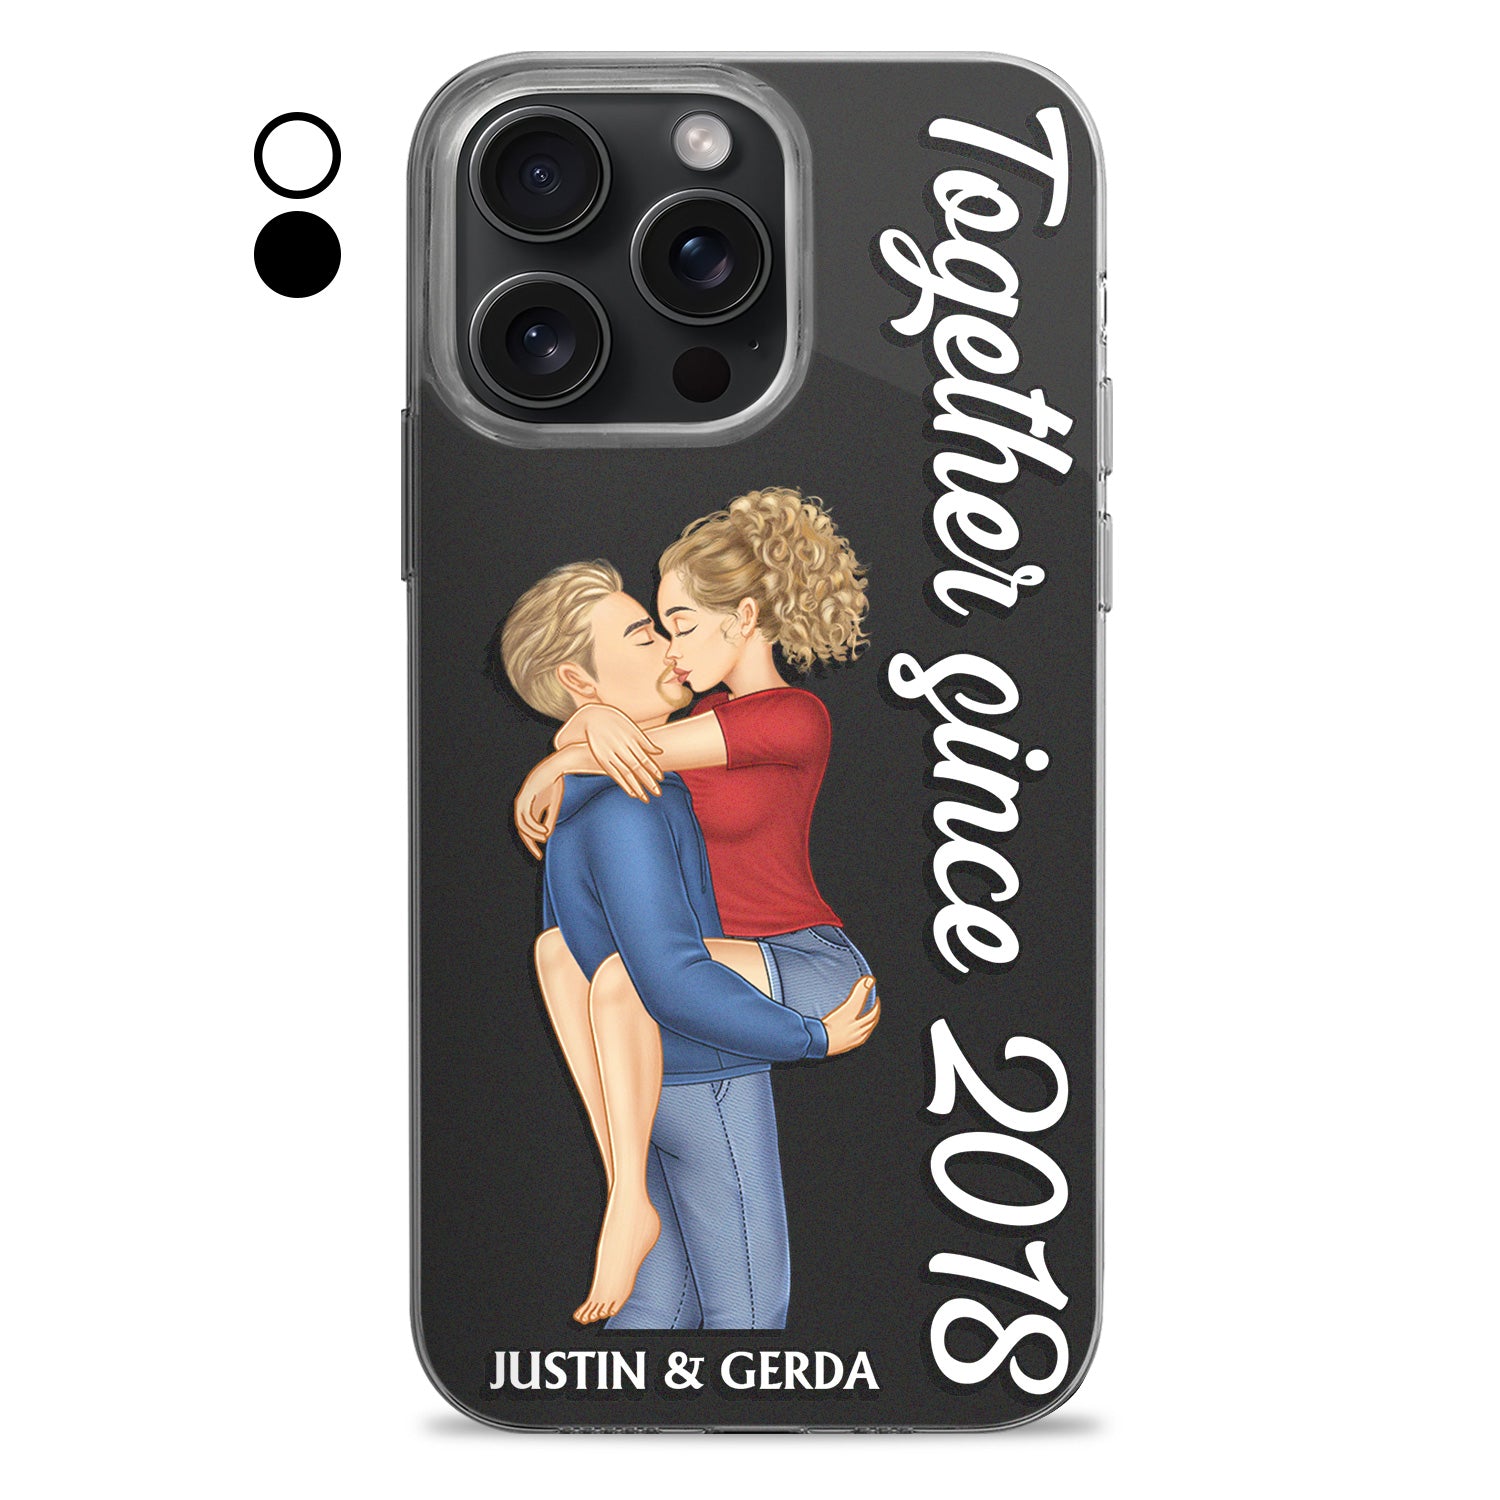 Together Since Couple Kissing - Loving, Anniversary Gift For Spouse, Husband, Wife - Personalized Clear Phone Case